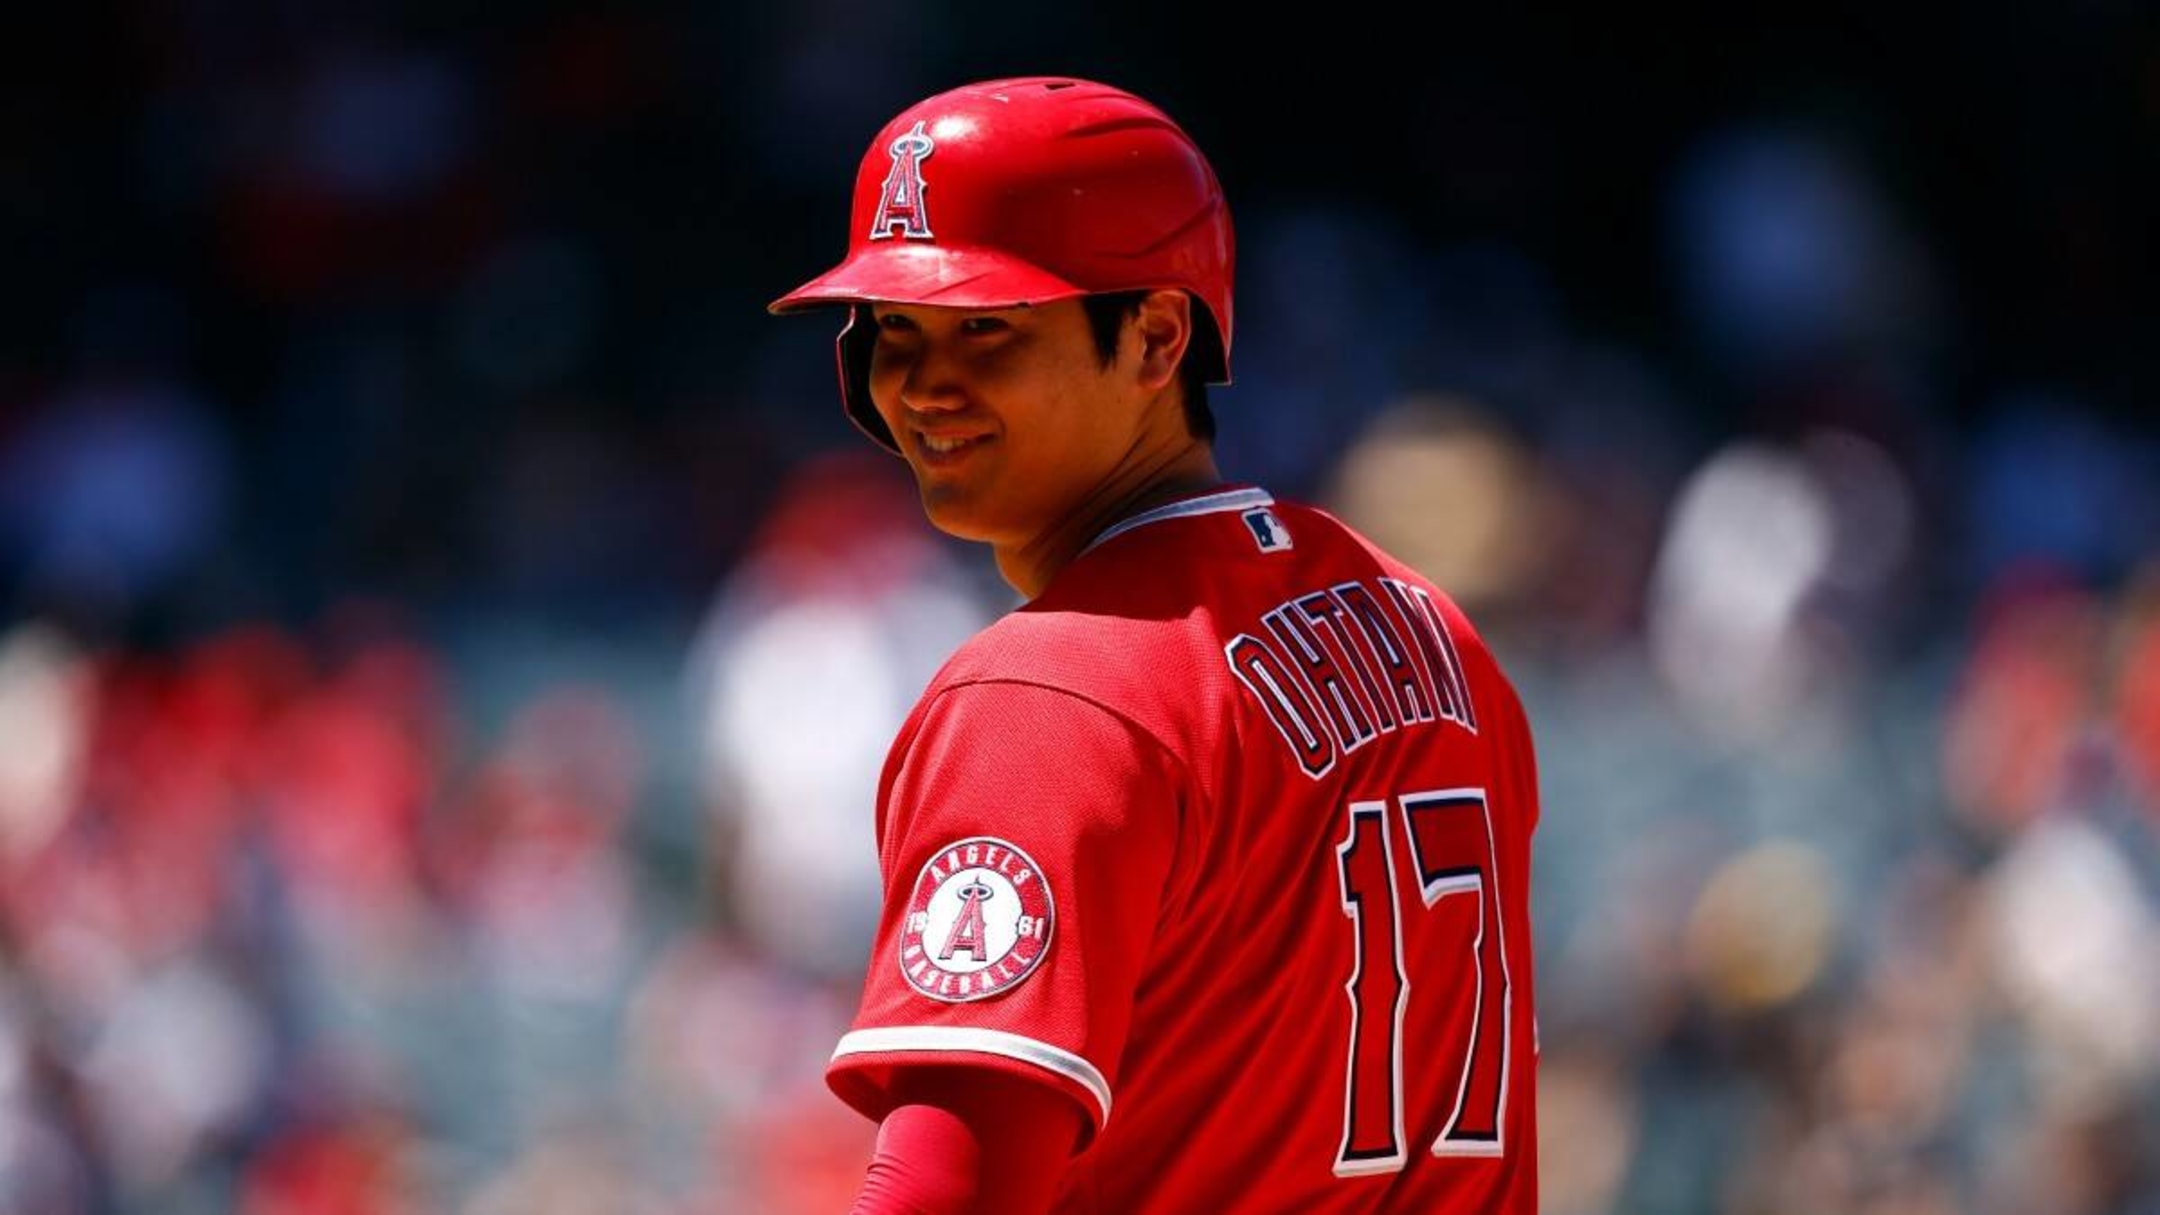 Angels' Ohtani likely to set new record in free agency